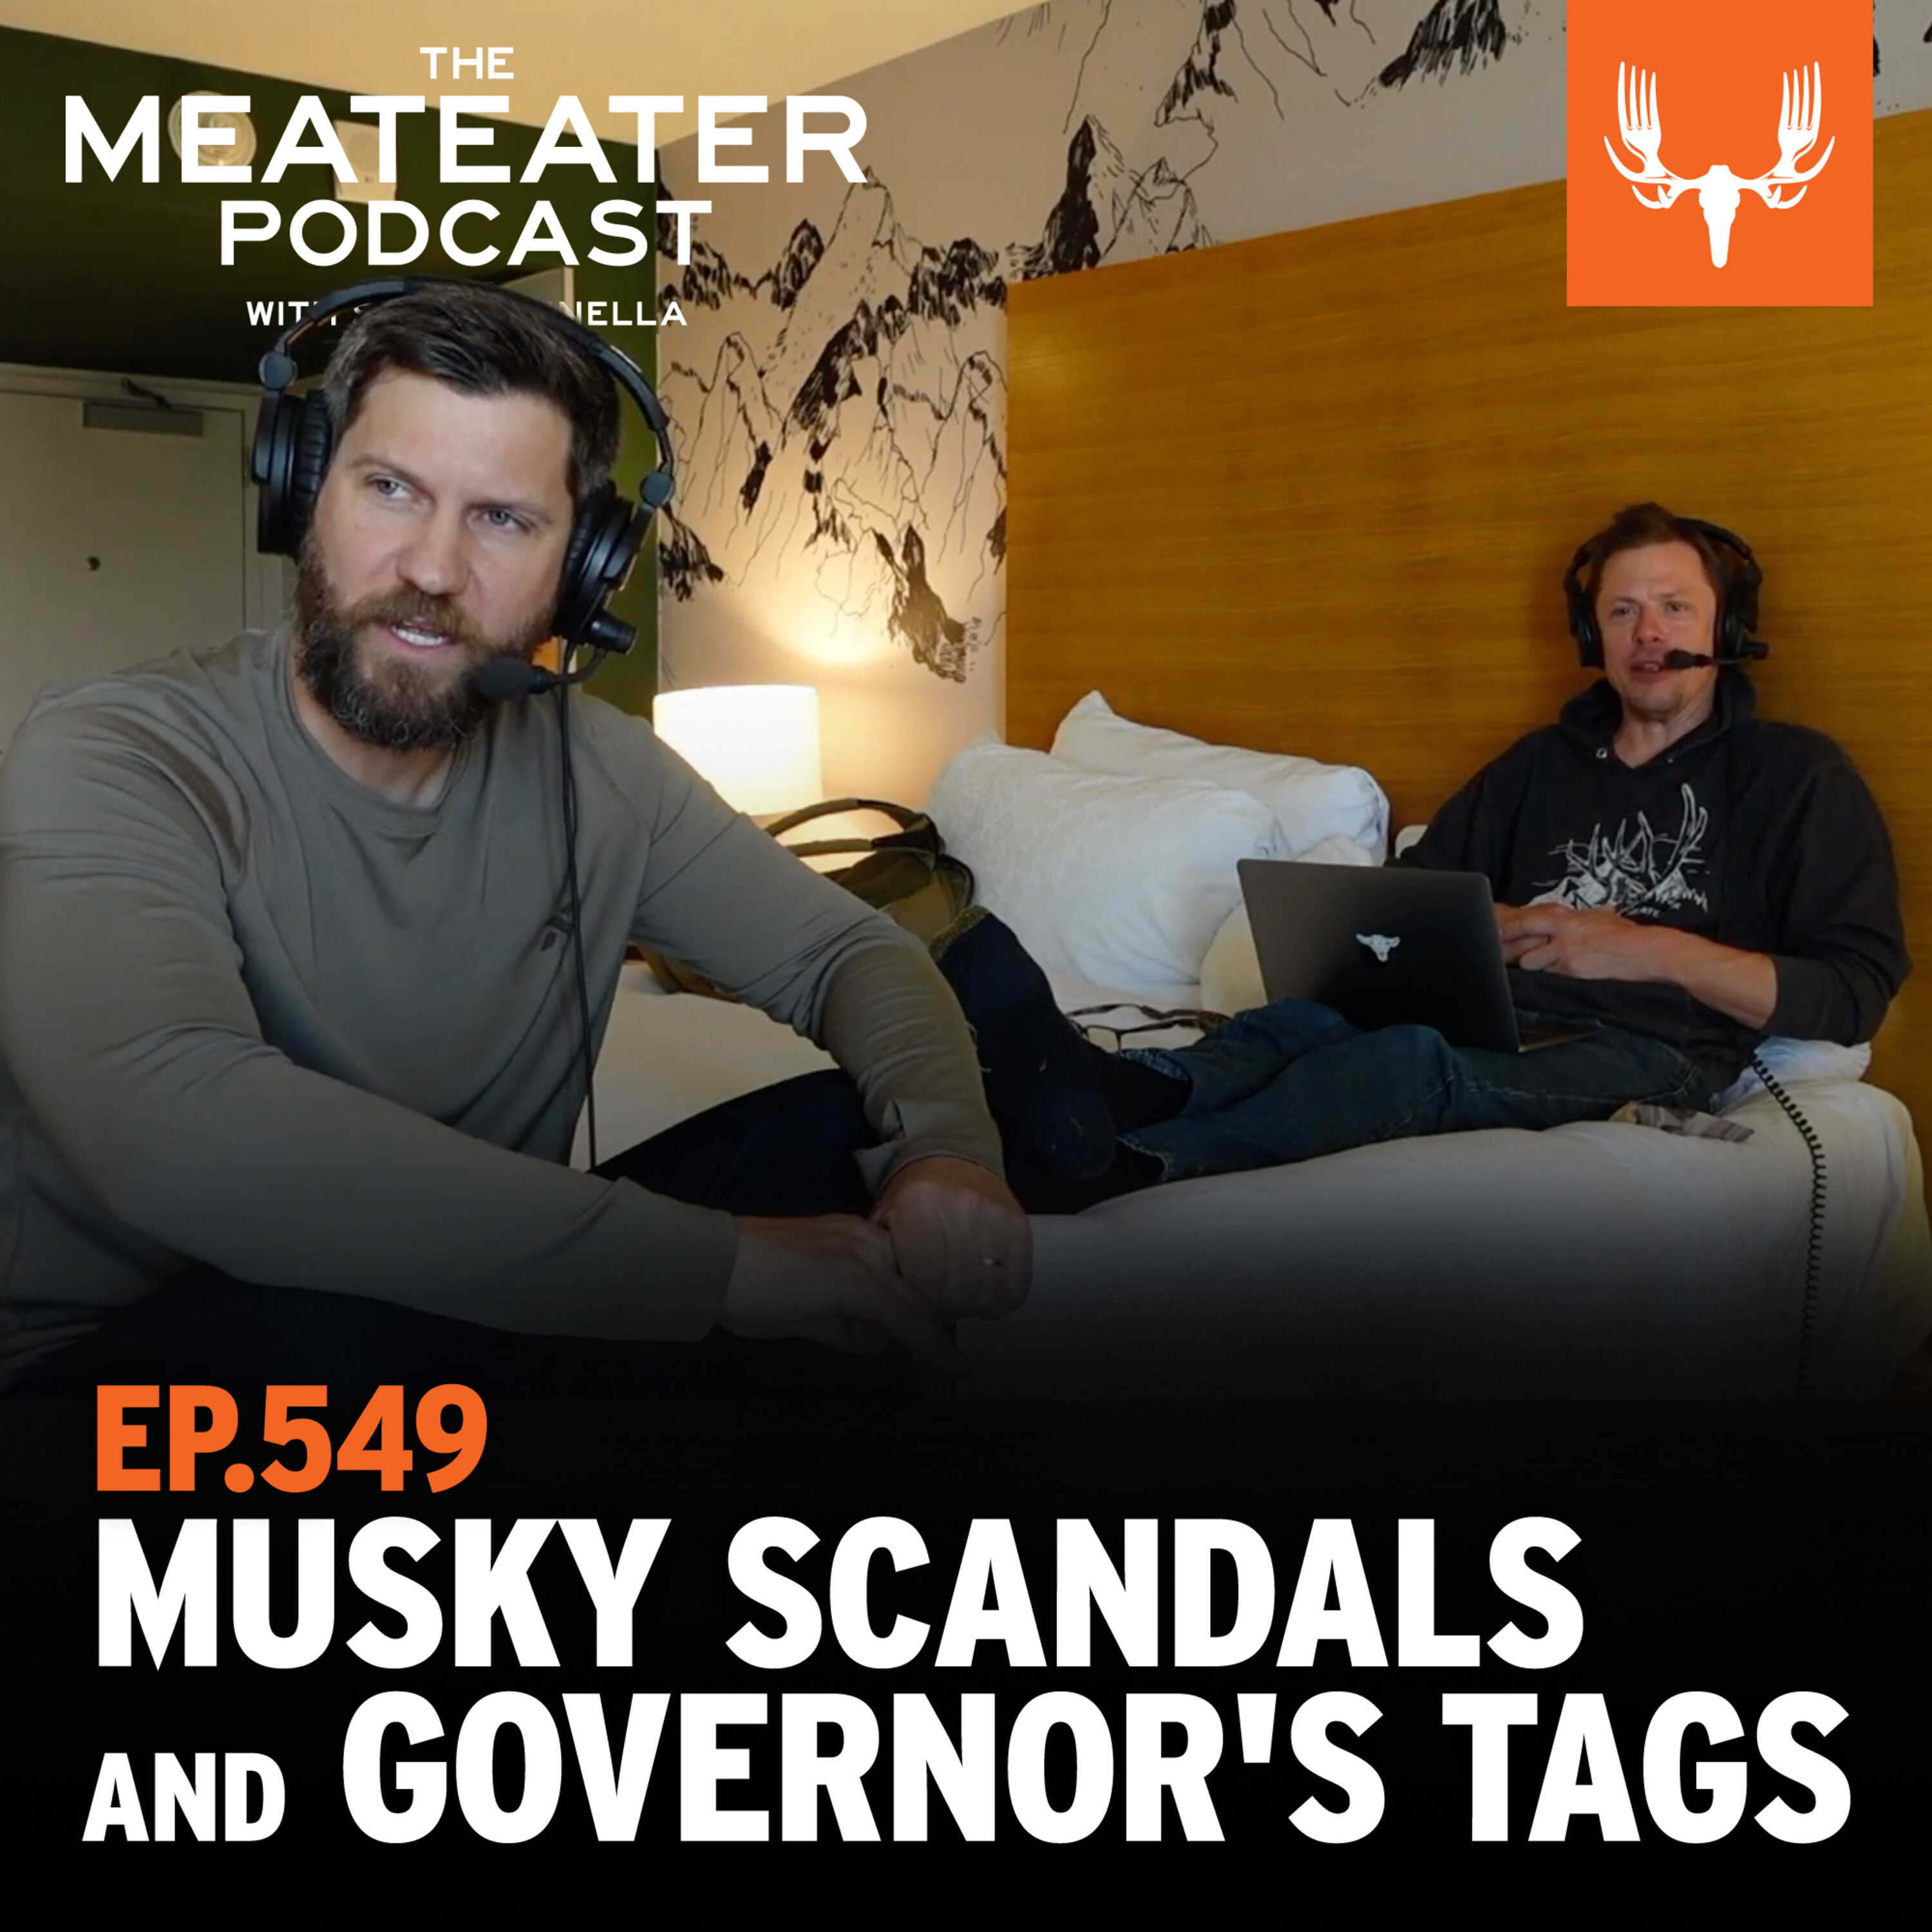 Ep. 549: Musky Scandals and Governor's Tags Get a Kick to the Nuts